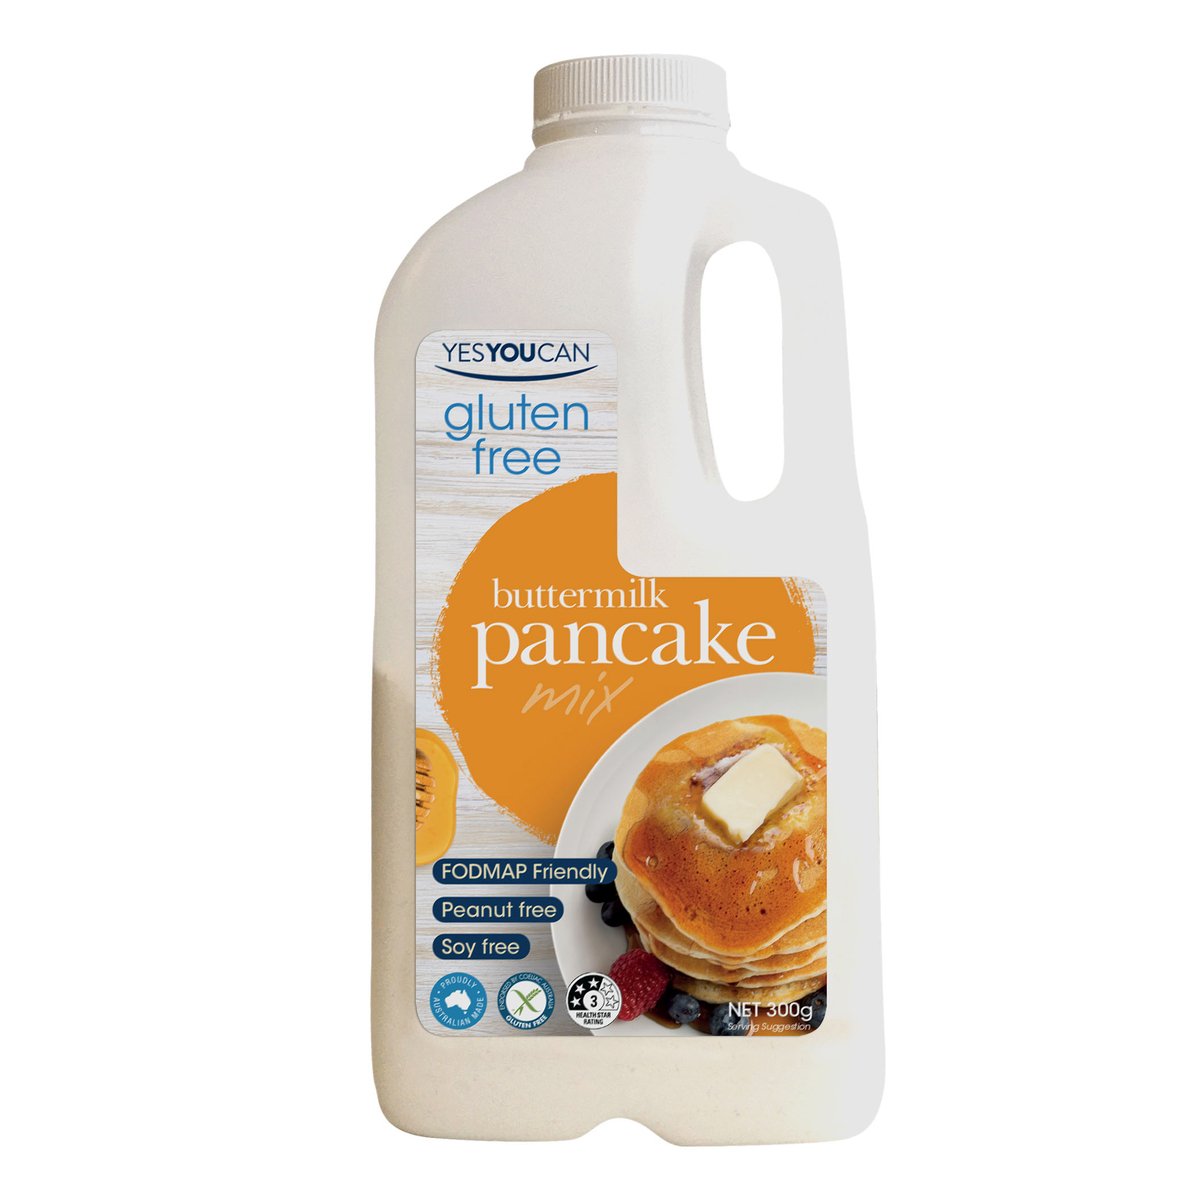 Yes You Can Gluten Free Buttermilk Pancake Mix 300 g